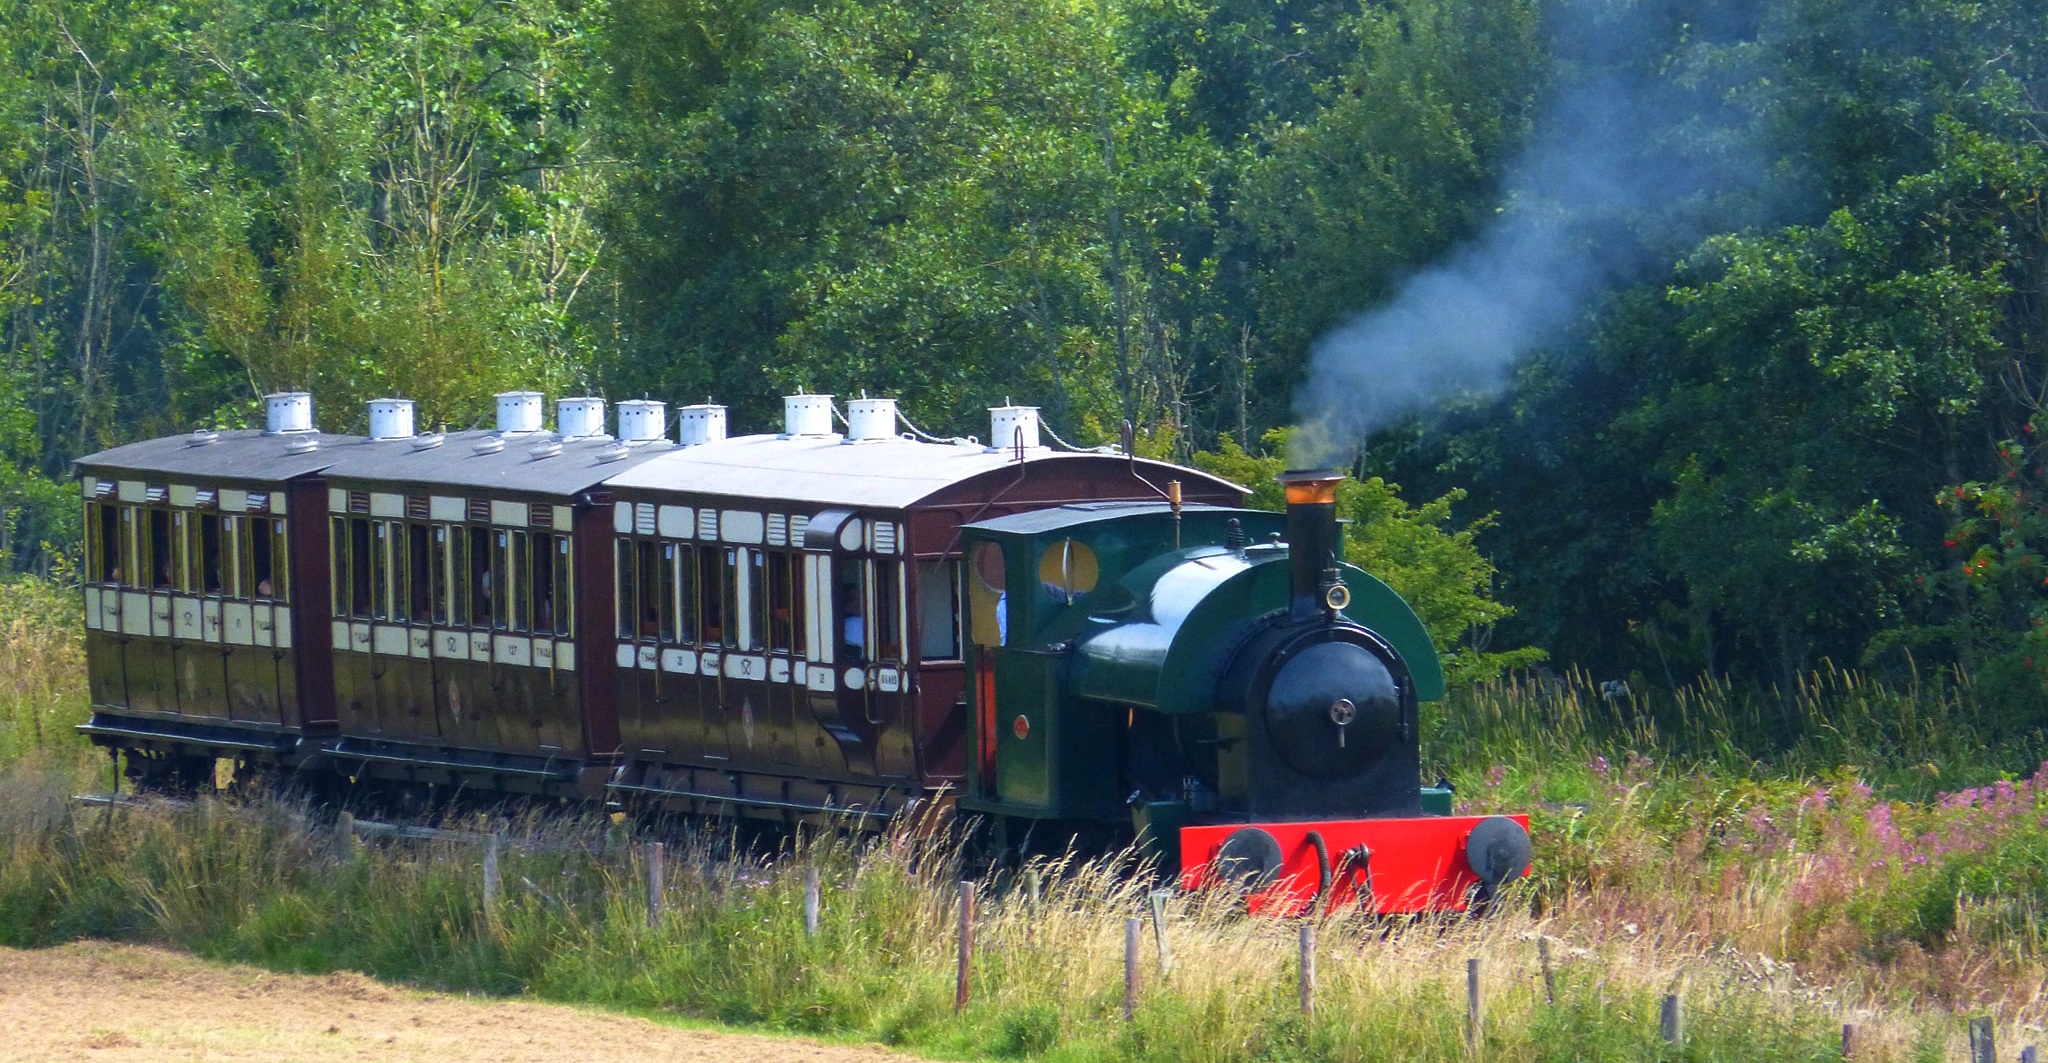 Knotty Coaches and Midlands Saloon at Foxfield Railway